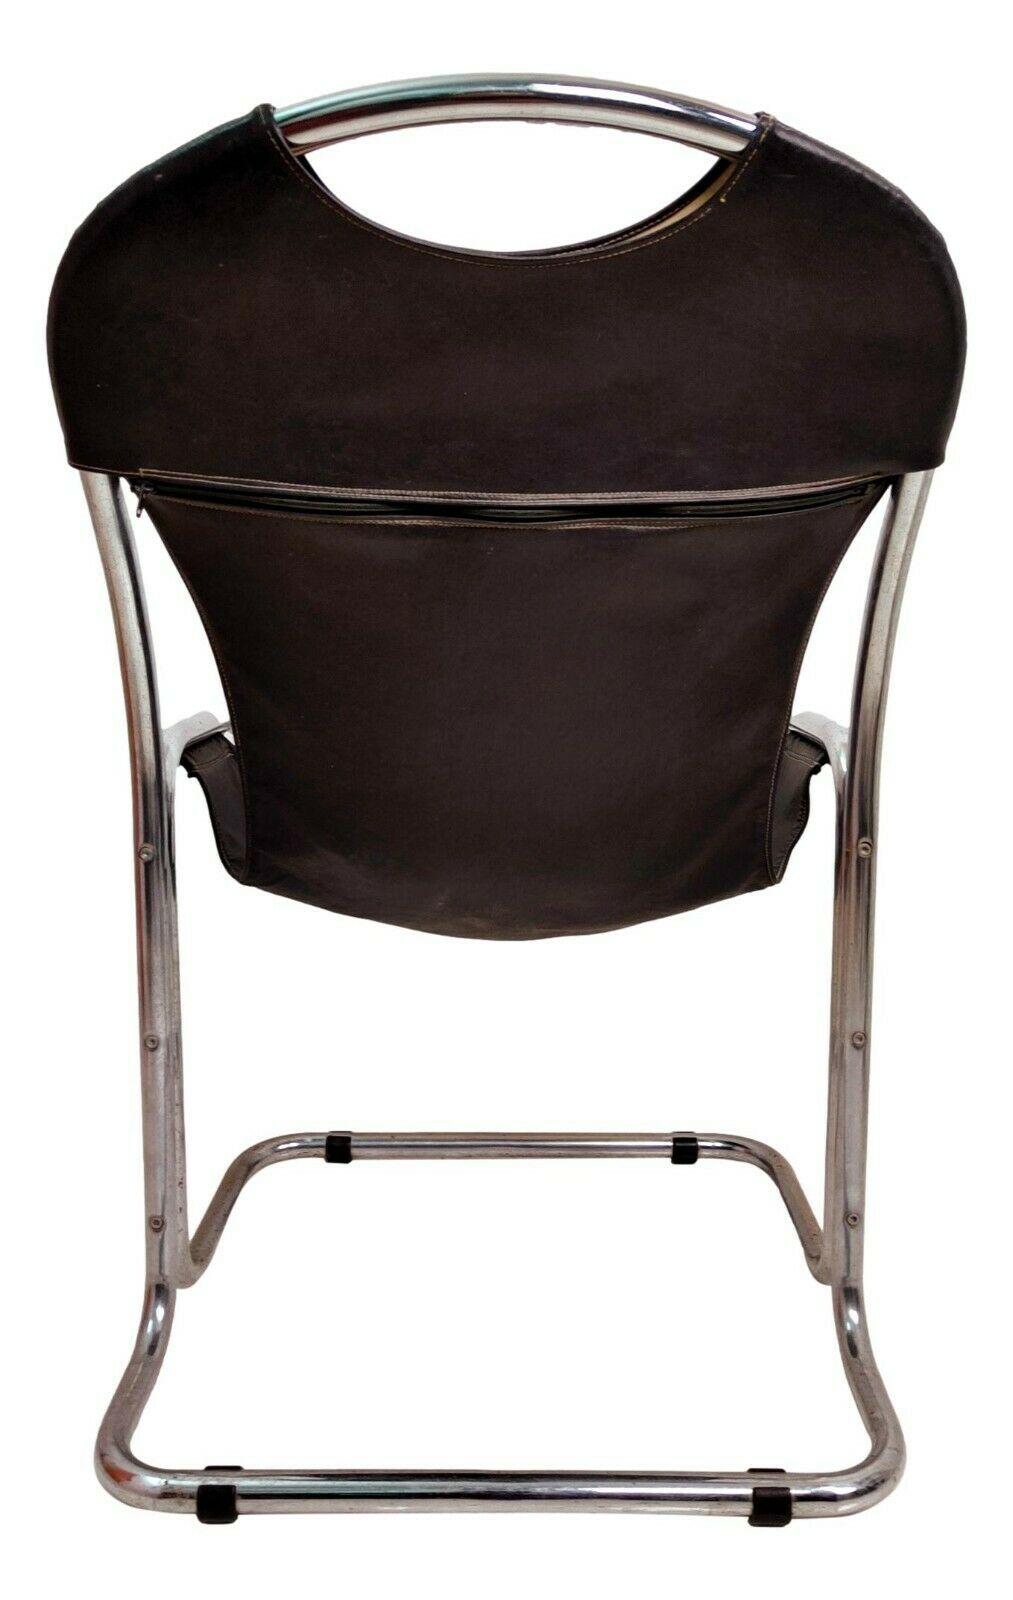 Designer collection chair, clearly inspired by Bauhaus, made of chromed metal tubing, single sheet upholstery in black eco-leather

It measures 90 cm in height, 56 cm in width and 56 cm in depth

In very good condition, as shown in the photos,